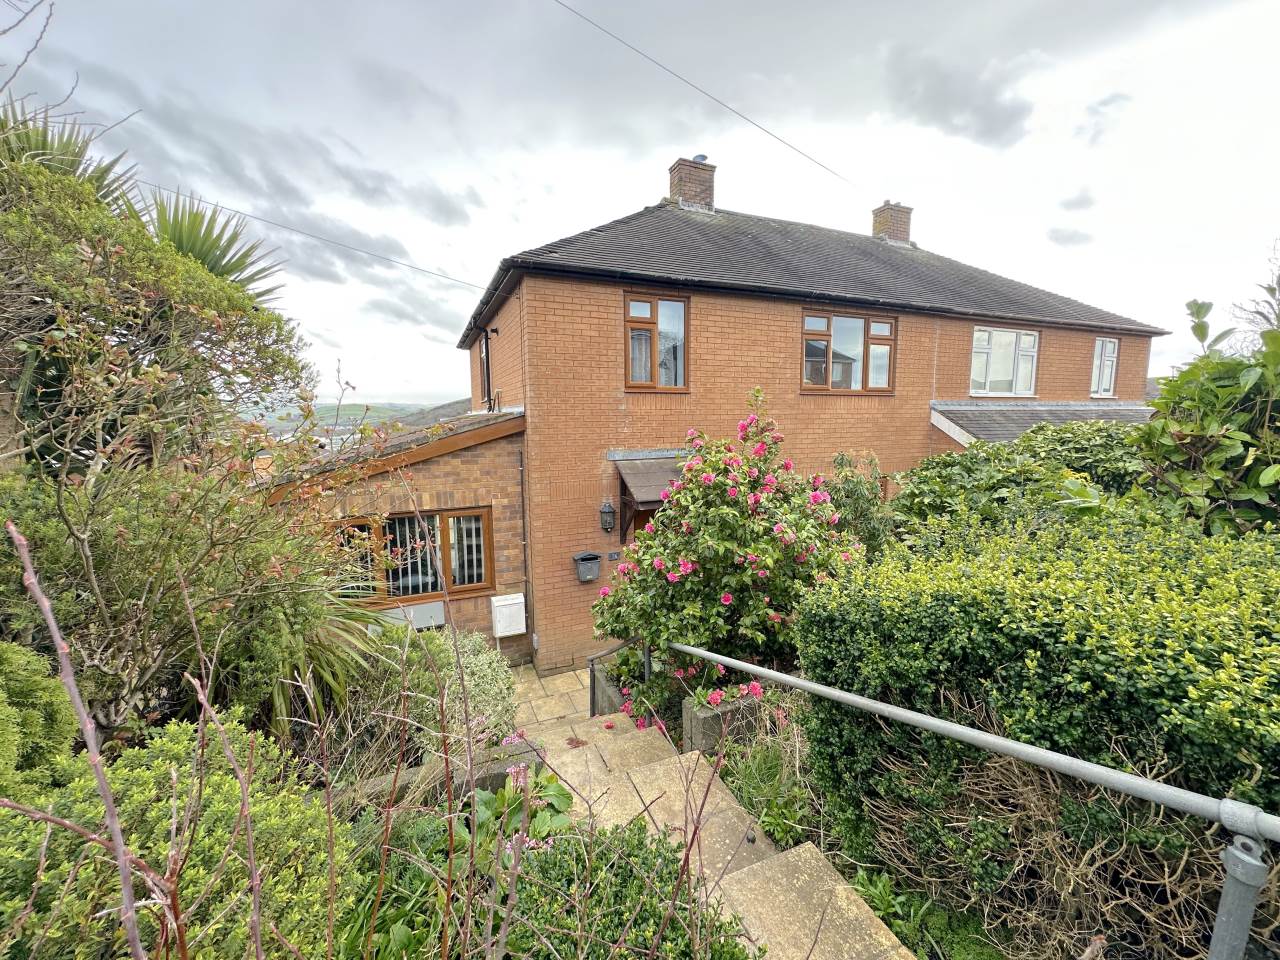 3 bed house for sale in Heol-Y-Garth, Penparcau - Property Image 1